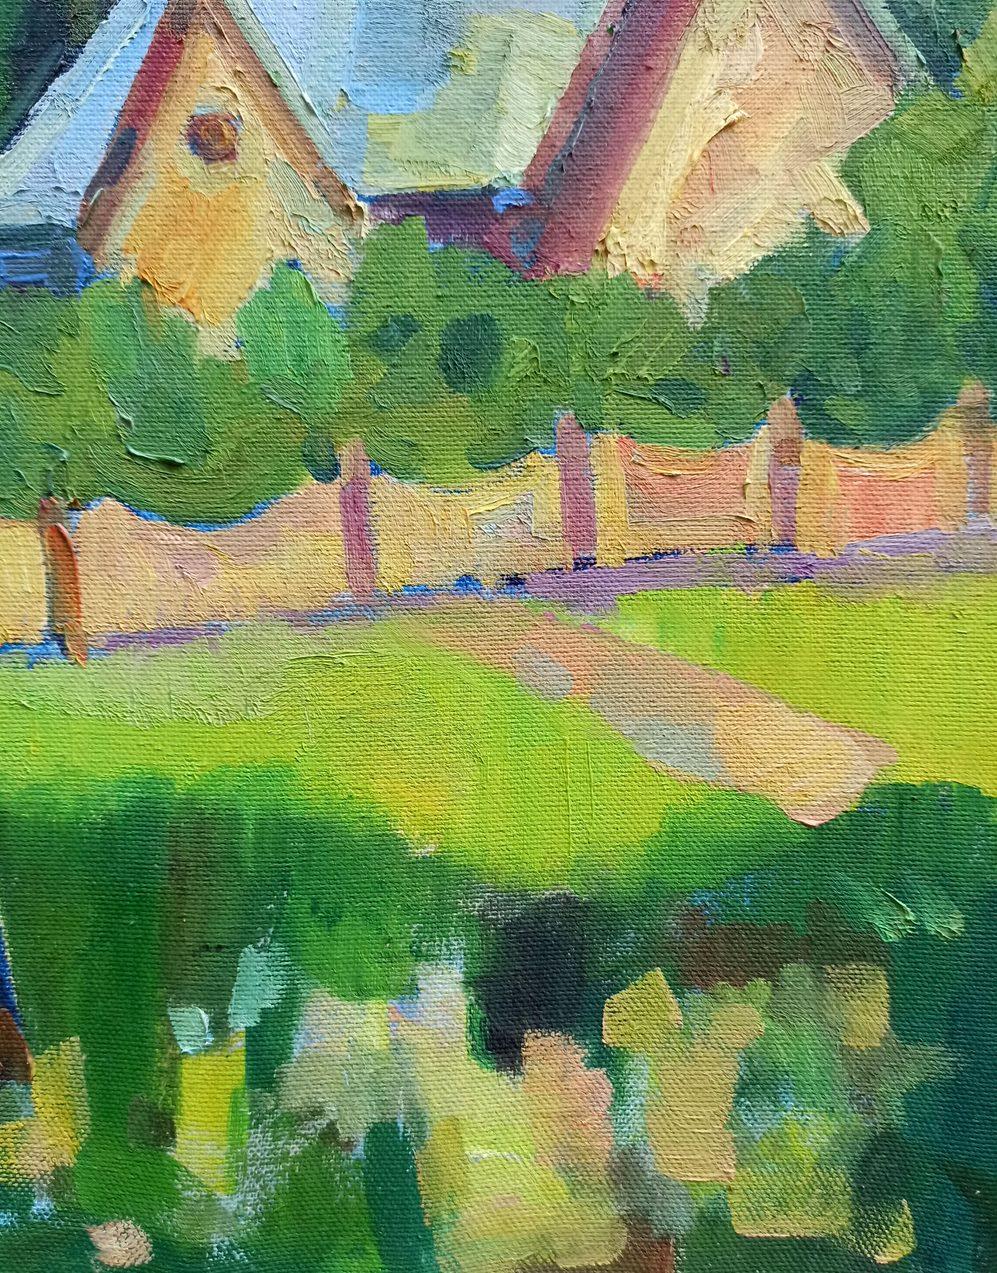 Artist: Peter Tovpev
Work: Original oil painting, handmade artwork, one of a kind 
Medium: Oil on Canvas 
Year: 2017
Style: Post  Impressionism
Title: Country Houses
Size: 25.5